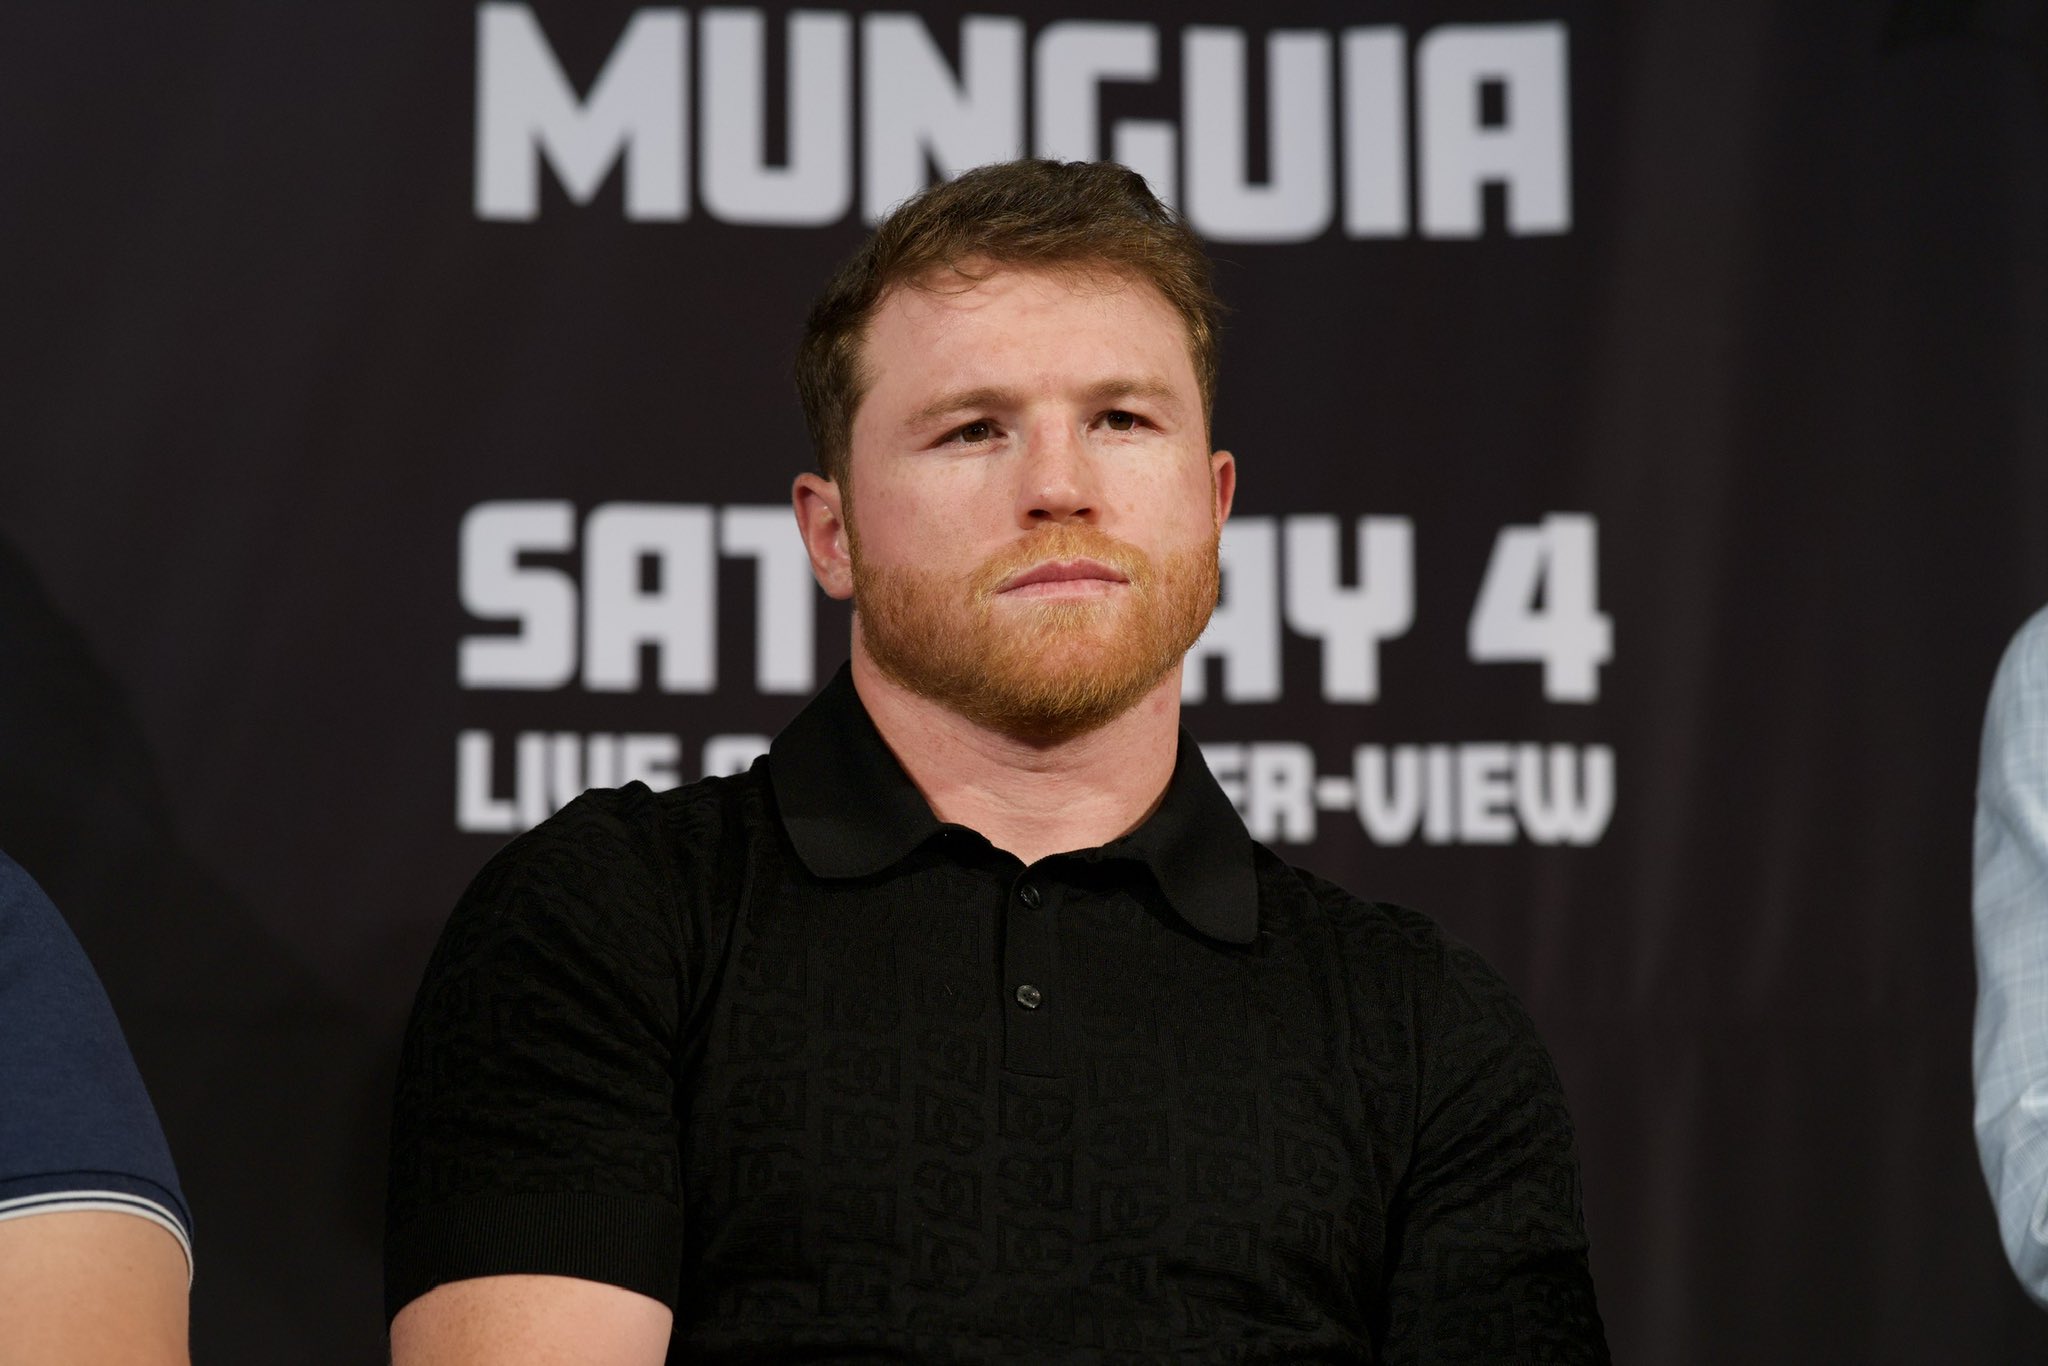 “I know I said I wouldn’t fight another Mexican fighter..." - Canelo Alvarez explains why he has chosen to face compatriot Jaime Munguia